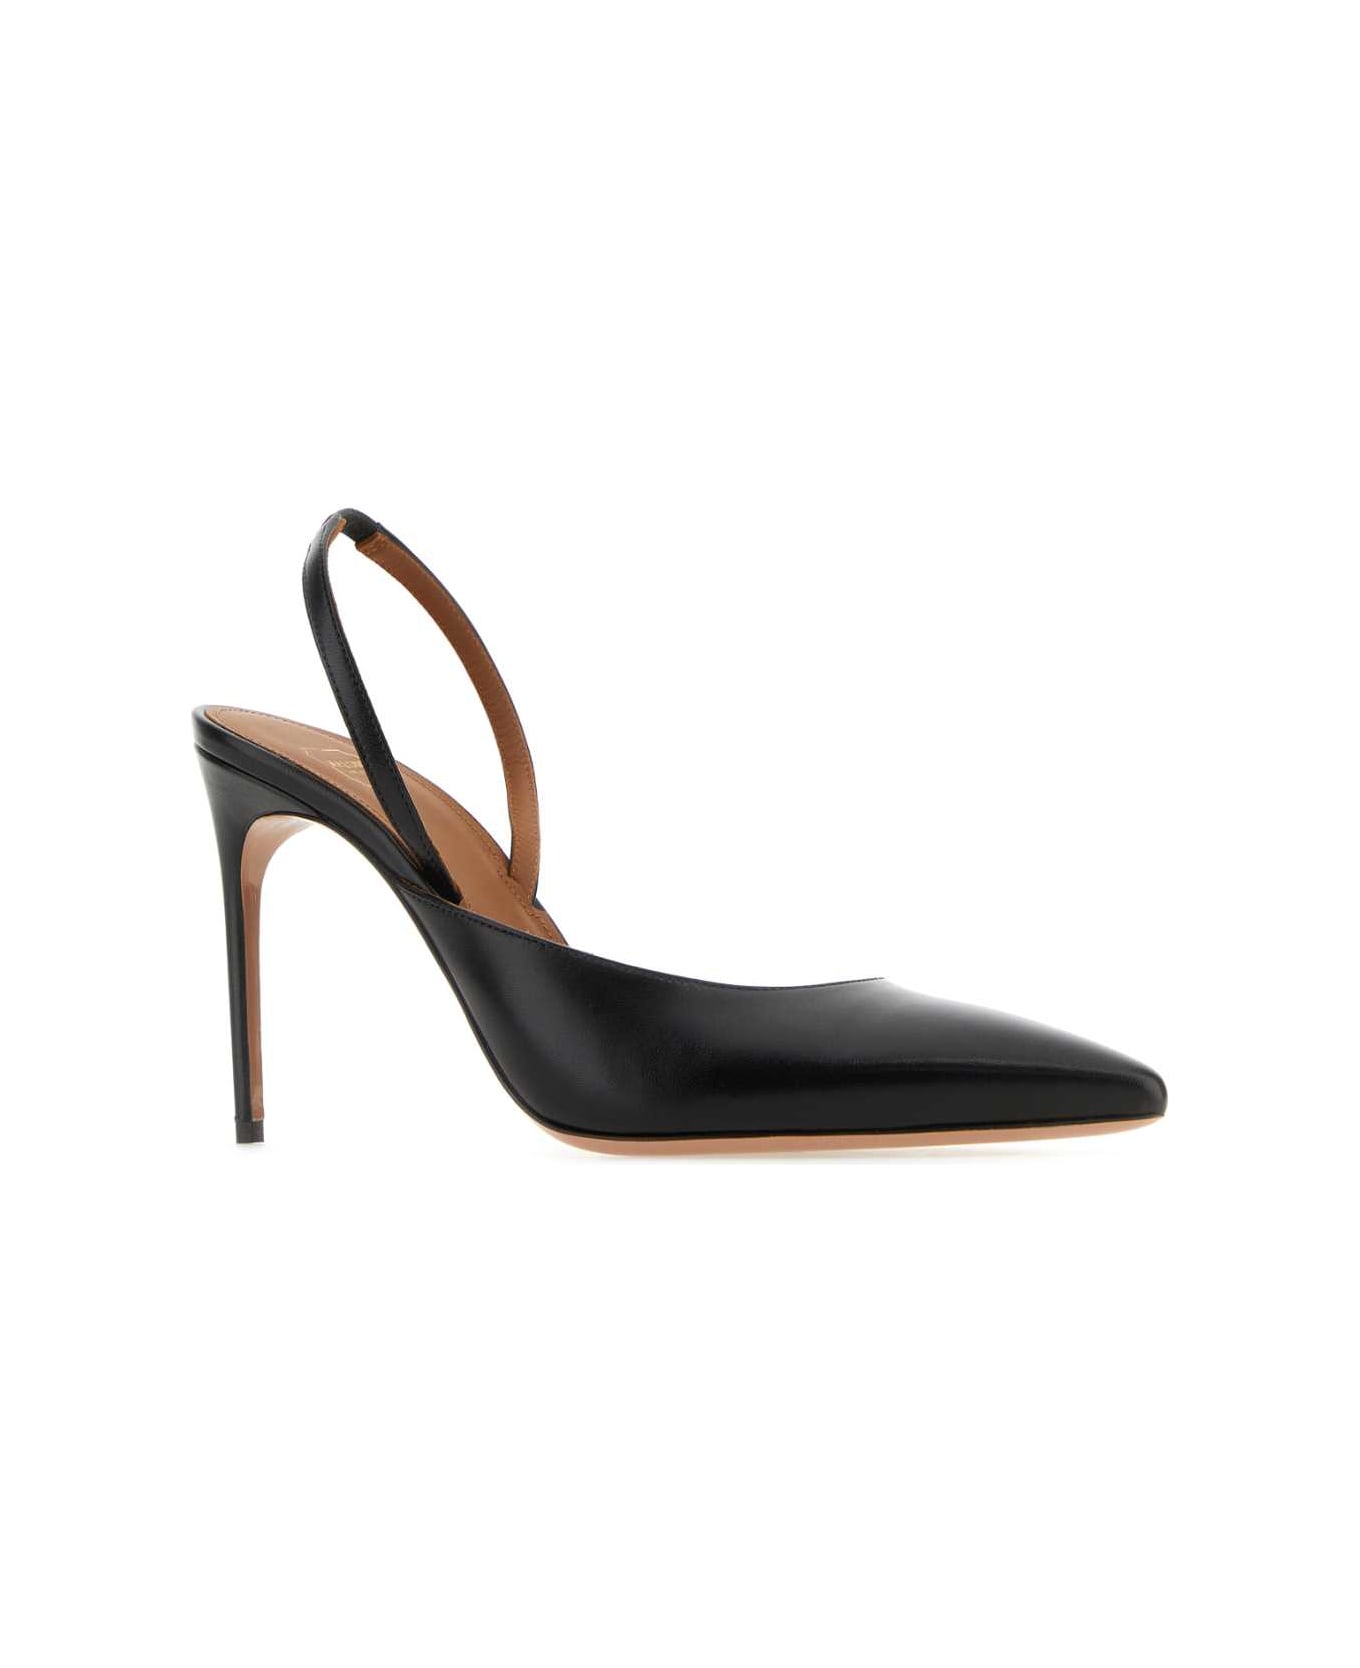 Malone Souliers Black Leather Pumps - BLACK ハイヒール